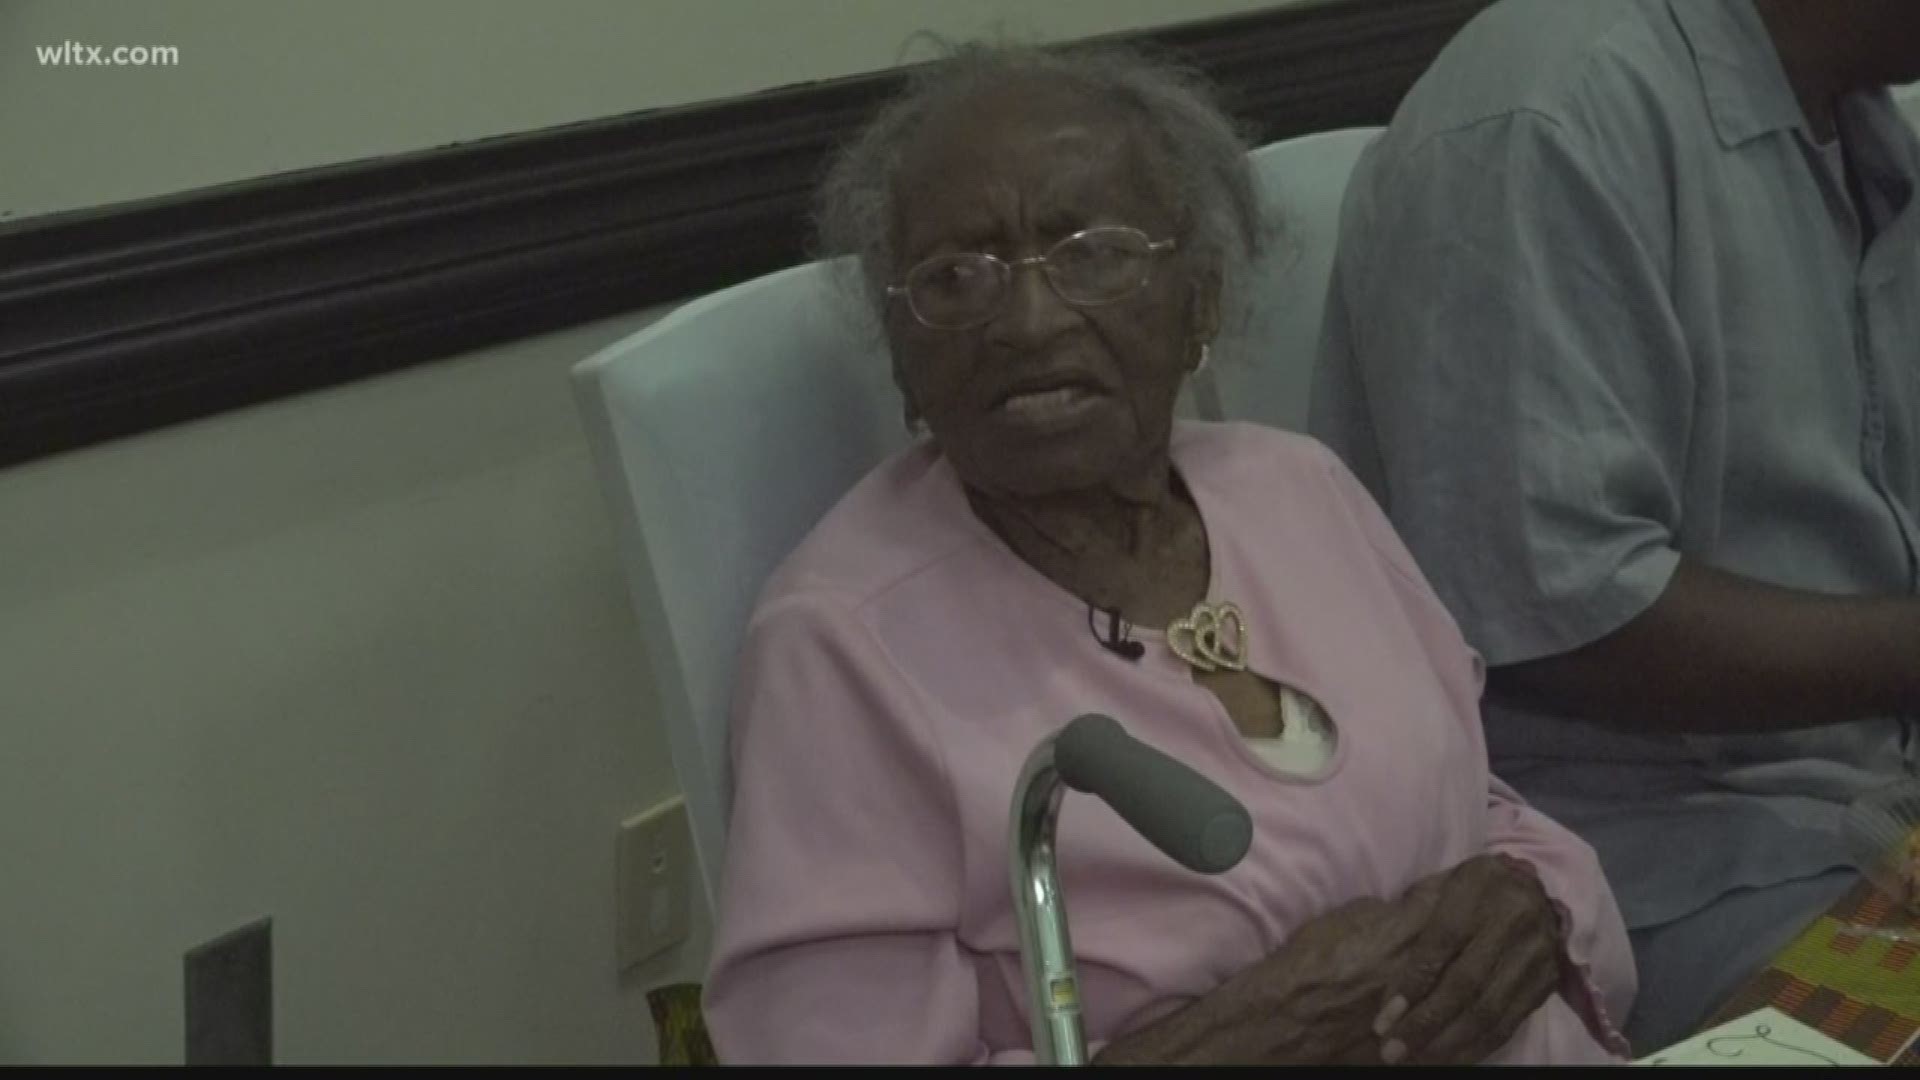 Asilee Gallishaw Walker turned 102 years old Saturday. She is a native of South Carolina, and spent the afternoon celebrating with family and friends.